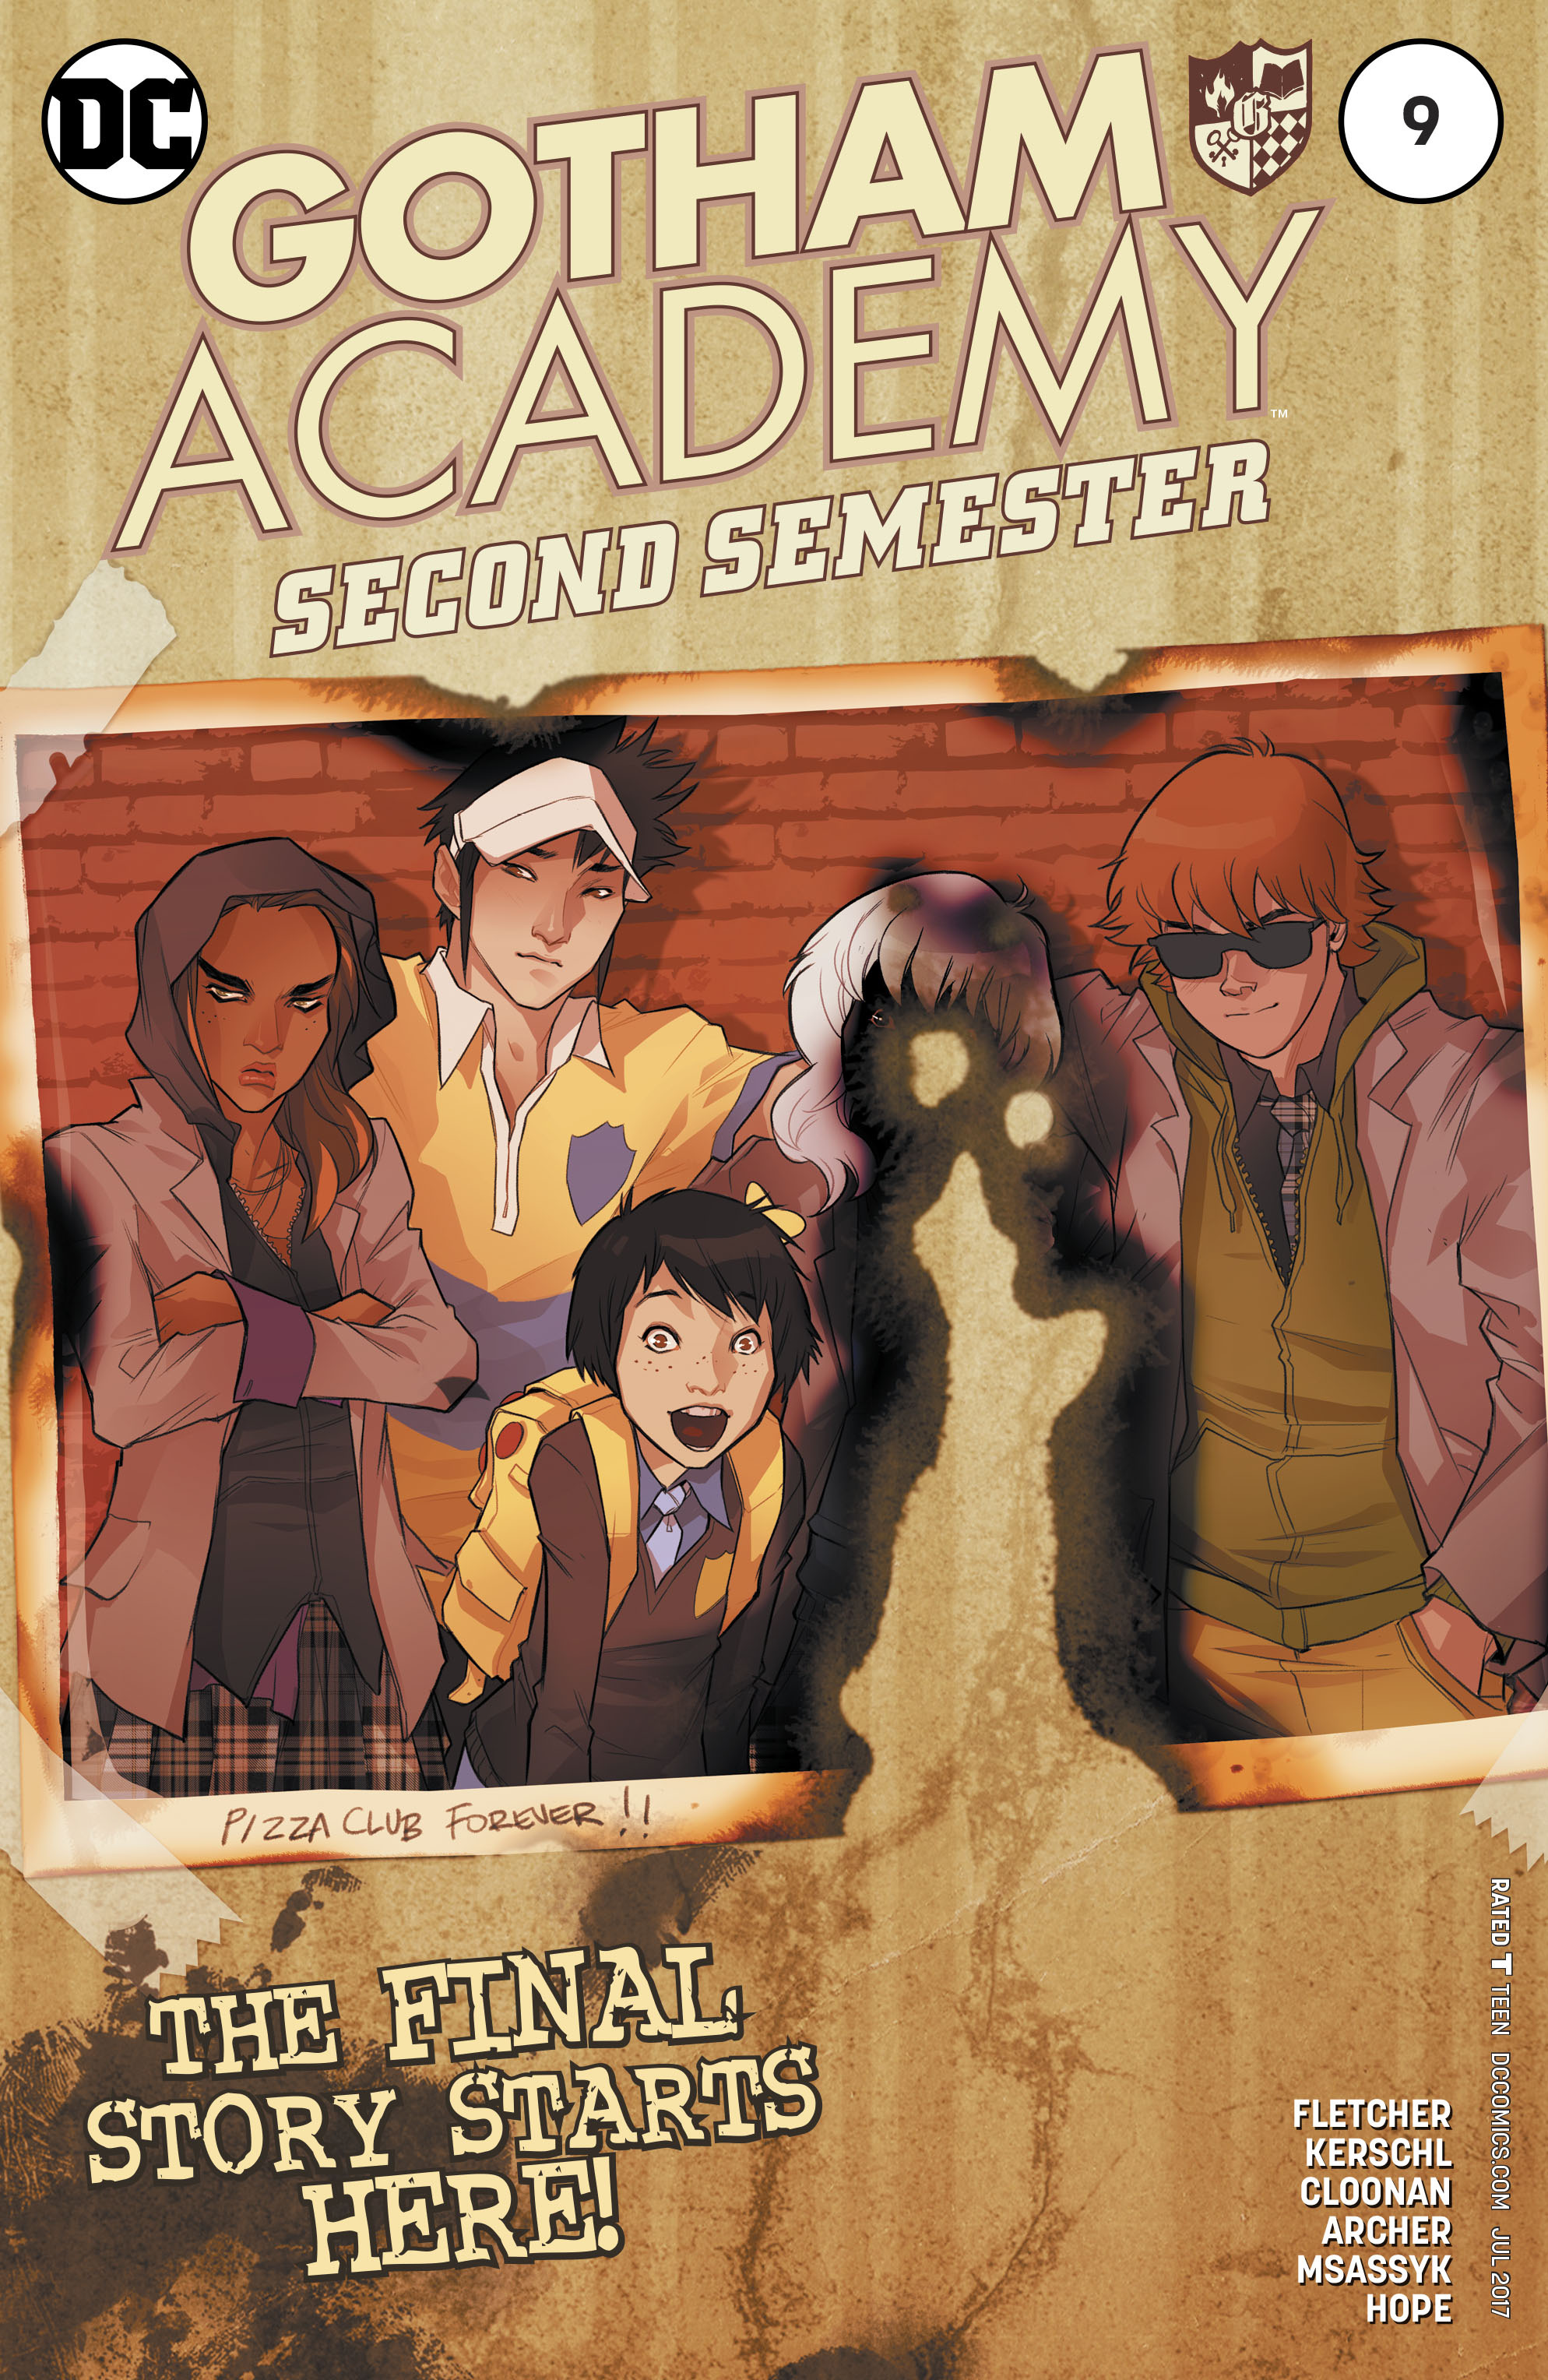 Read online Gotham Academy: Second Semester comic -  Issue #9 - 1